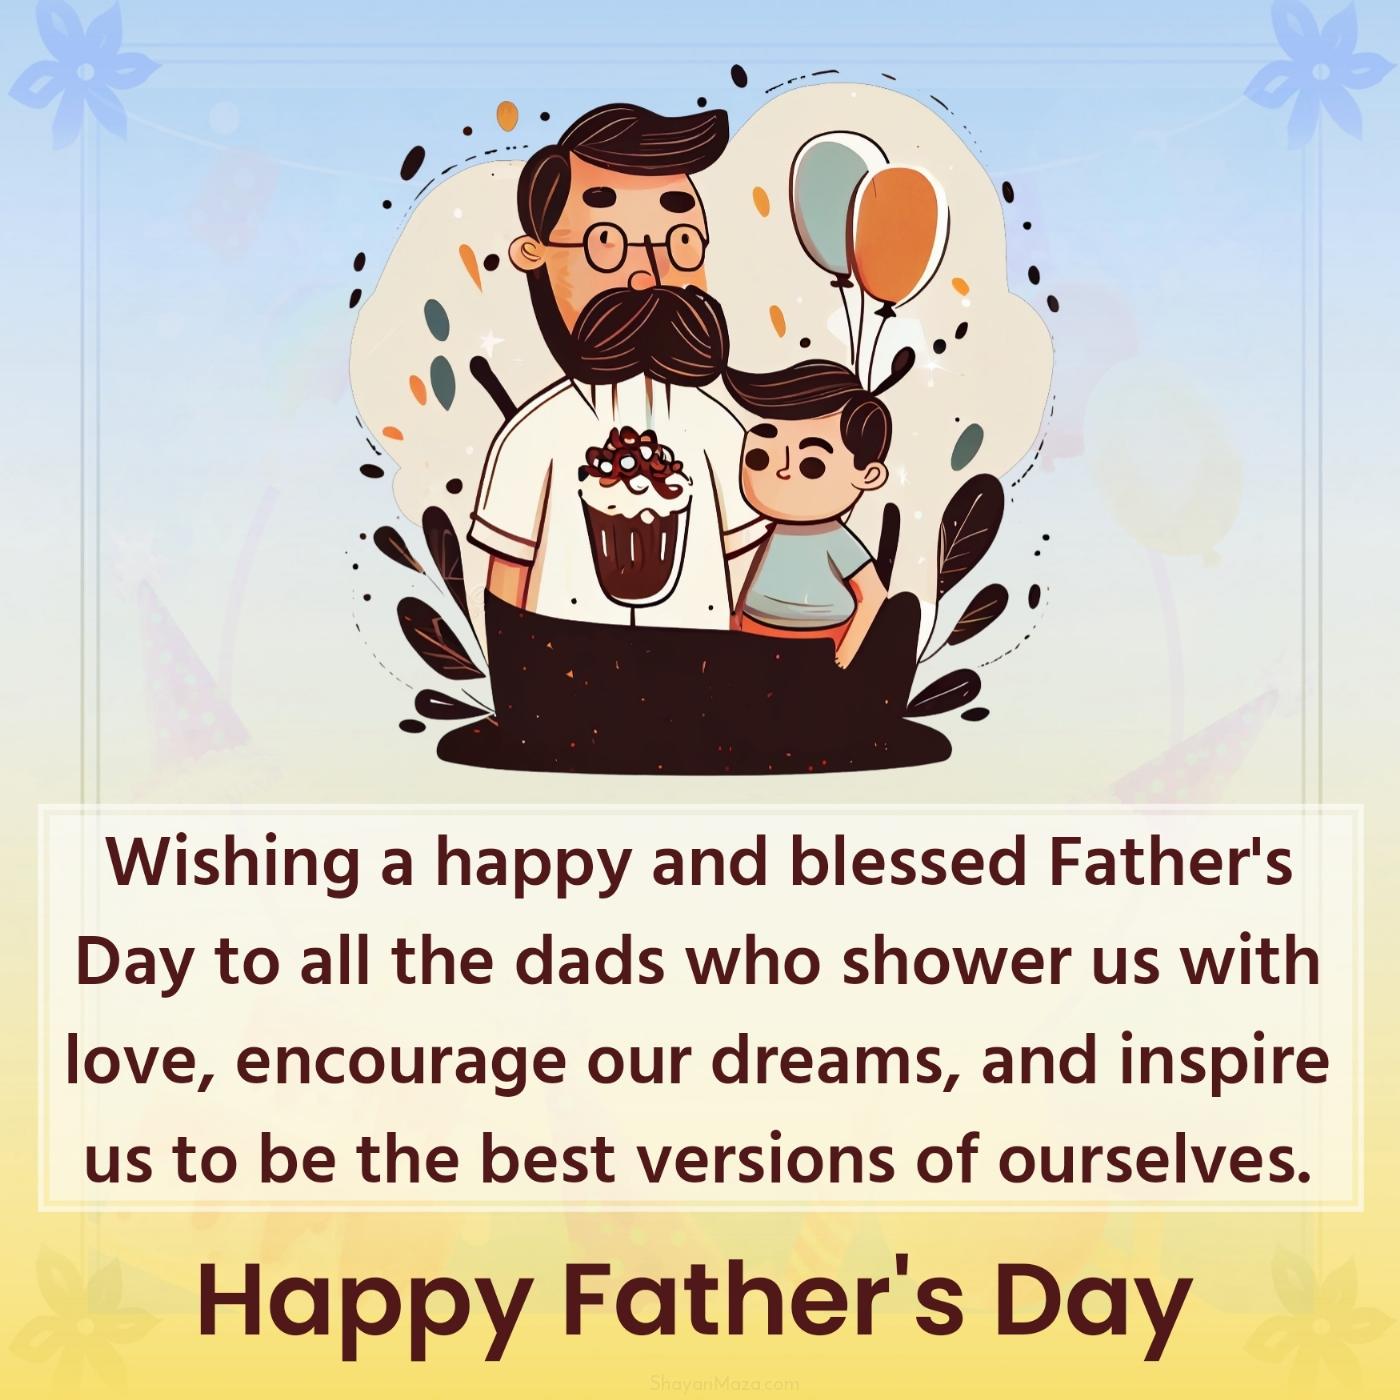 Wishing a happy and blessed Father's Day to all the dads